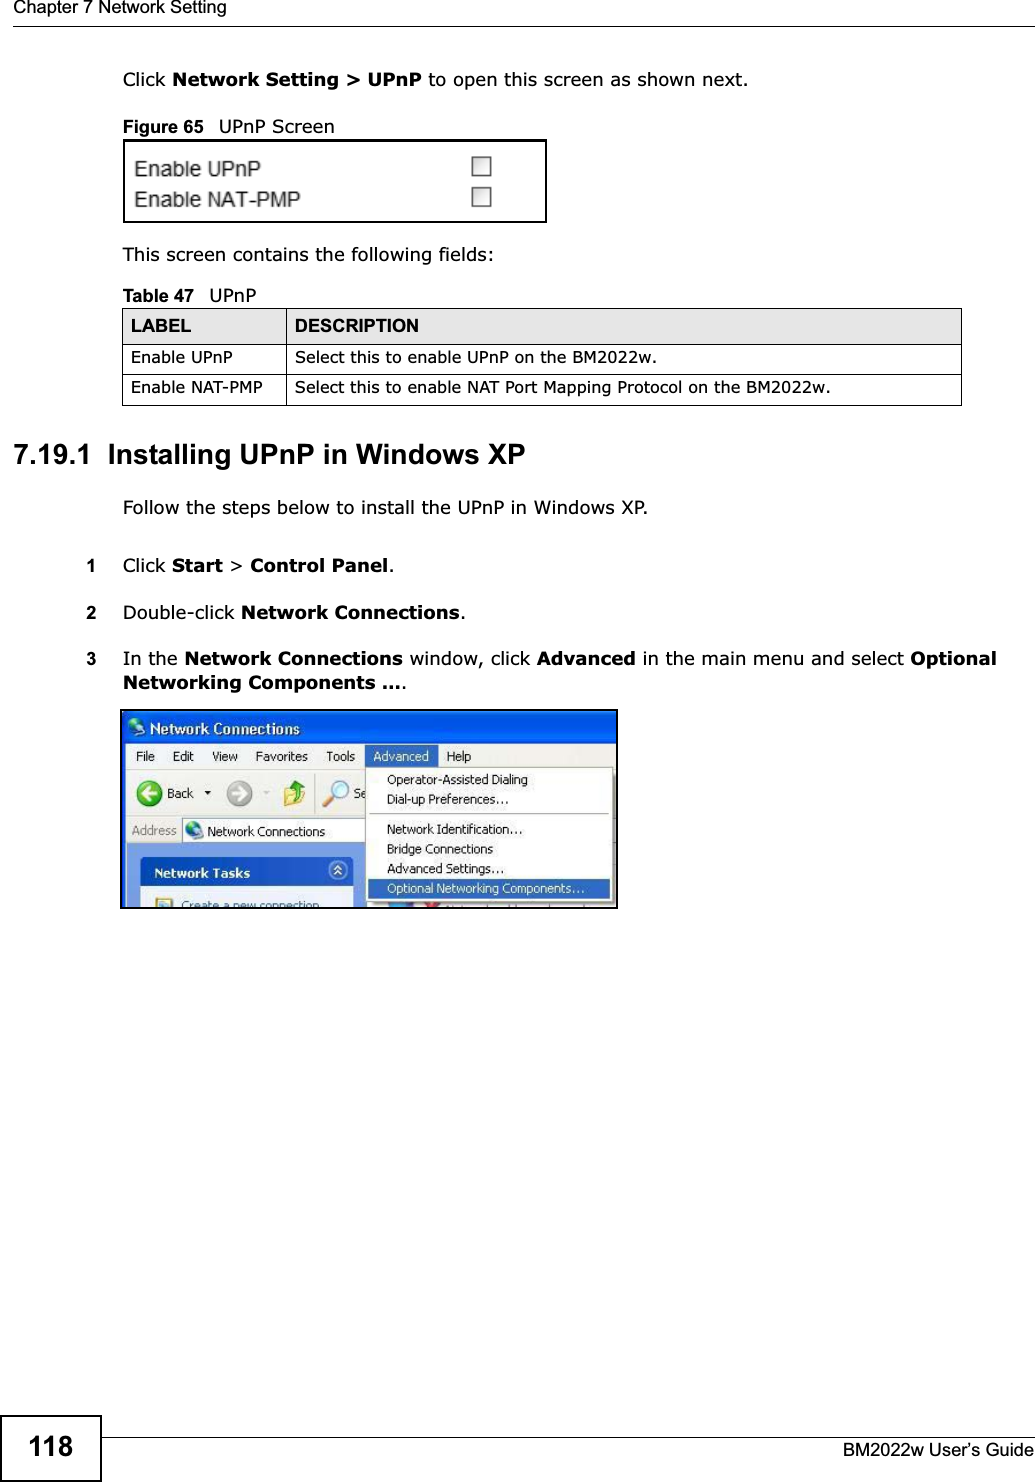 Chapter 7 Network SettingBM2022w User’s Guide118Click Network Setting &gt; UPnP to open this screen as shown next.Figure 65   UPnP ScreenThis screen contains the following fields:7.19.1  Installing UPnP in Windows XPFollow the steps below to install the UPnP in Windows XP.1Click Start &gt; Control Panel.2Double-click Network Connections.3In the Network Connections window, click Advanced in the main menu and select Optional Networking Components ….Table 47   UPnPLABEL DESCRIPTIONEnable UPnP Select this to enable UPnP on the BM2022w.Enable NAT-PMP Select this to enable NAT Port Mapping Protocol on the BM2022w.